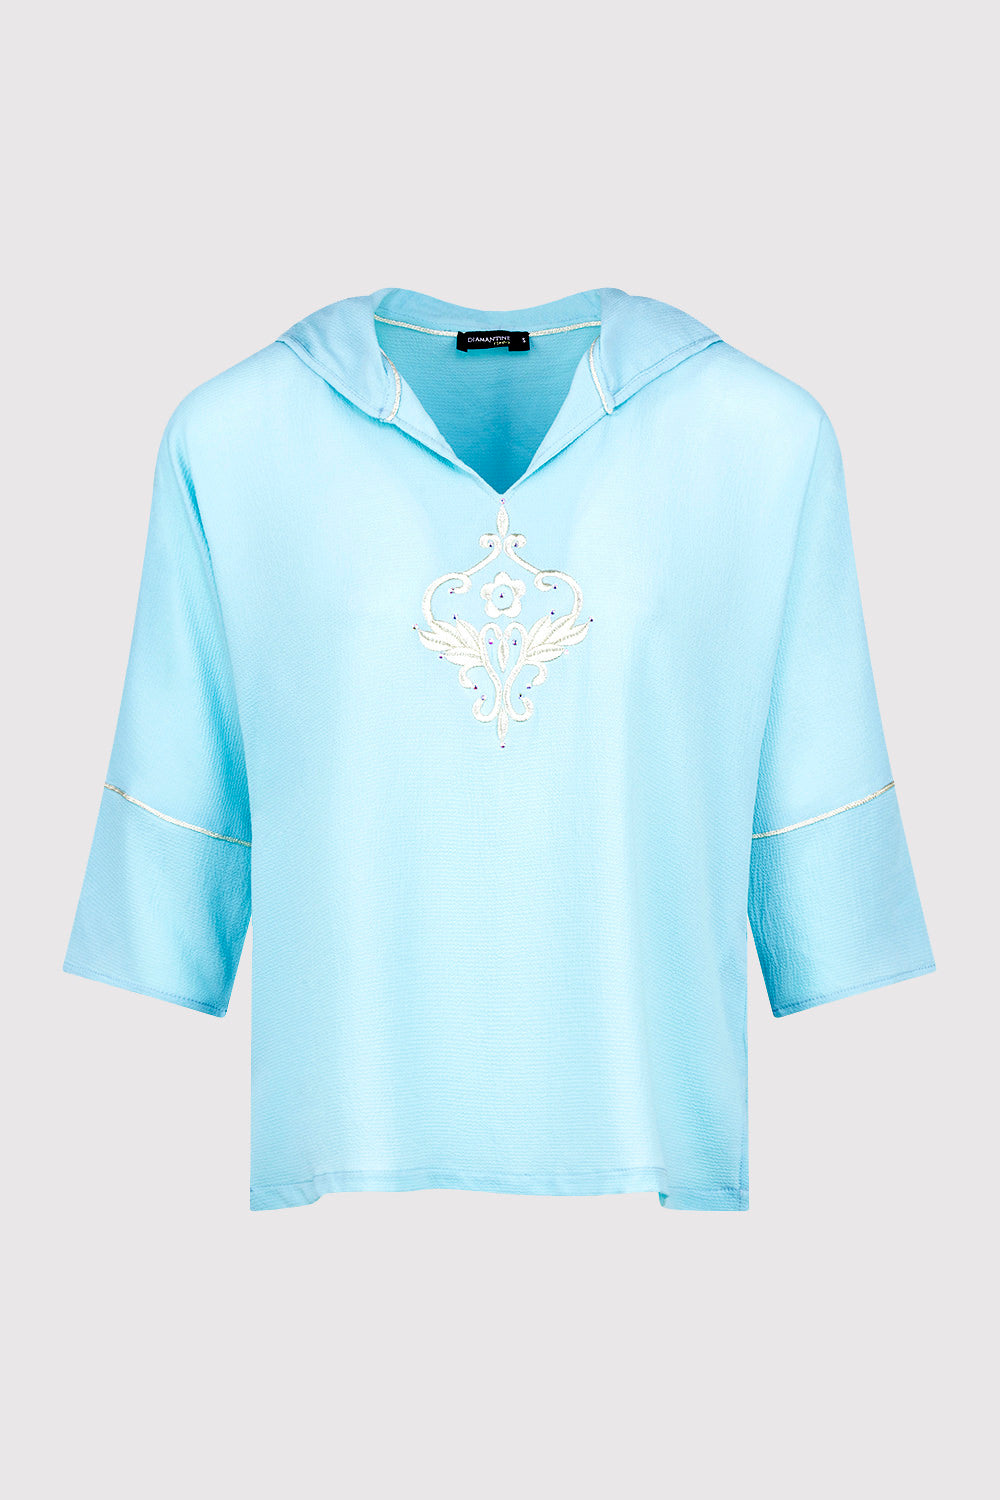 Katalina Embroidered Lightweight Casual Hooded Top in Blue